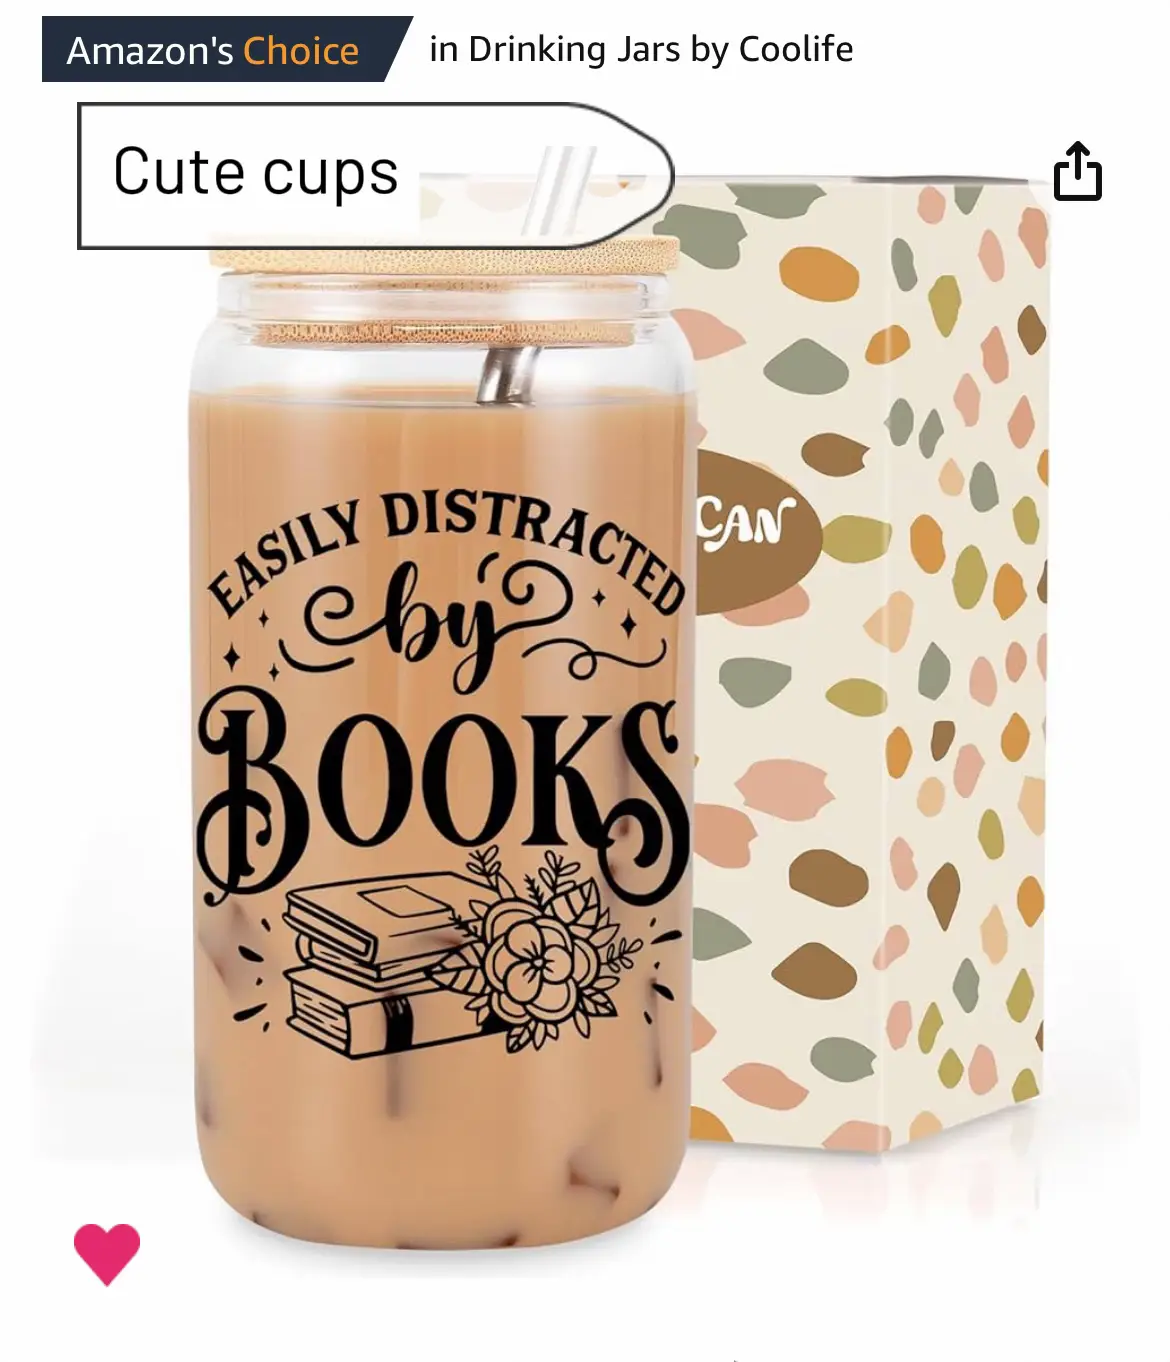  A jar with a book on it.